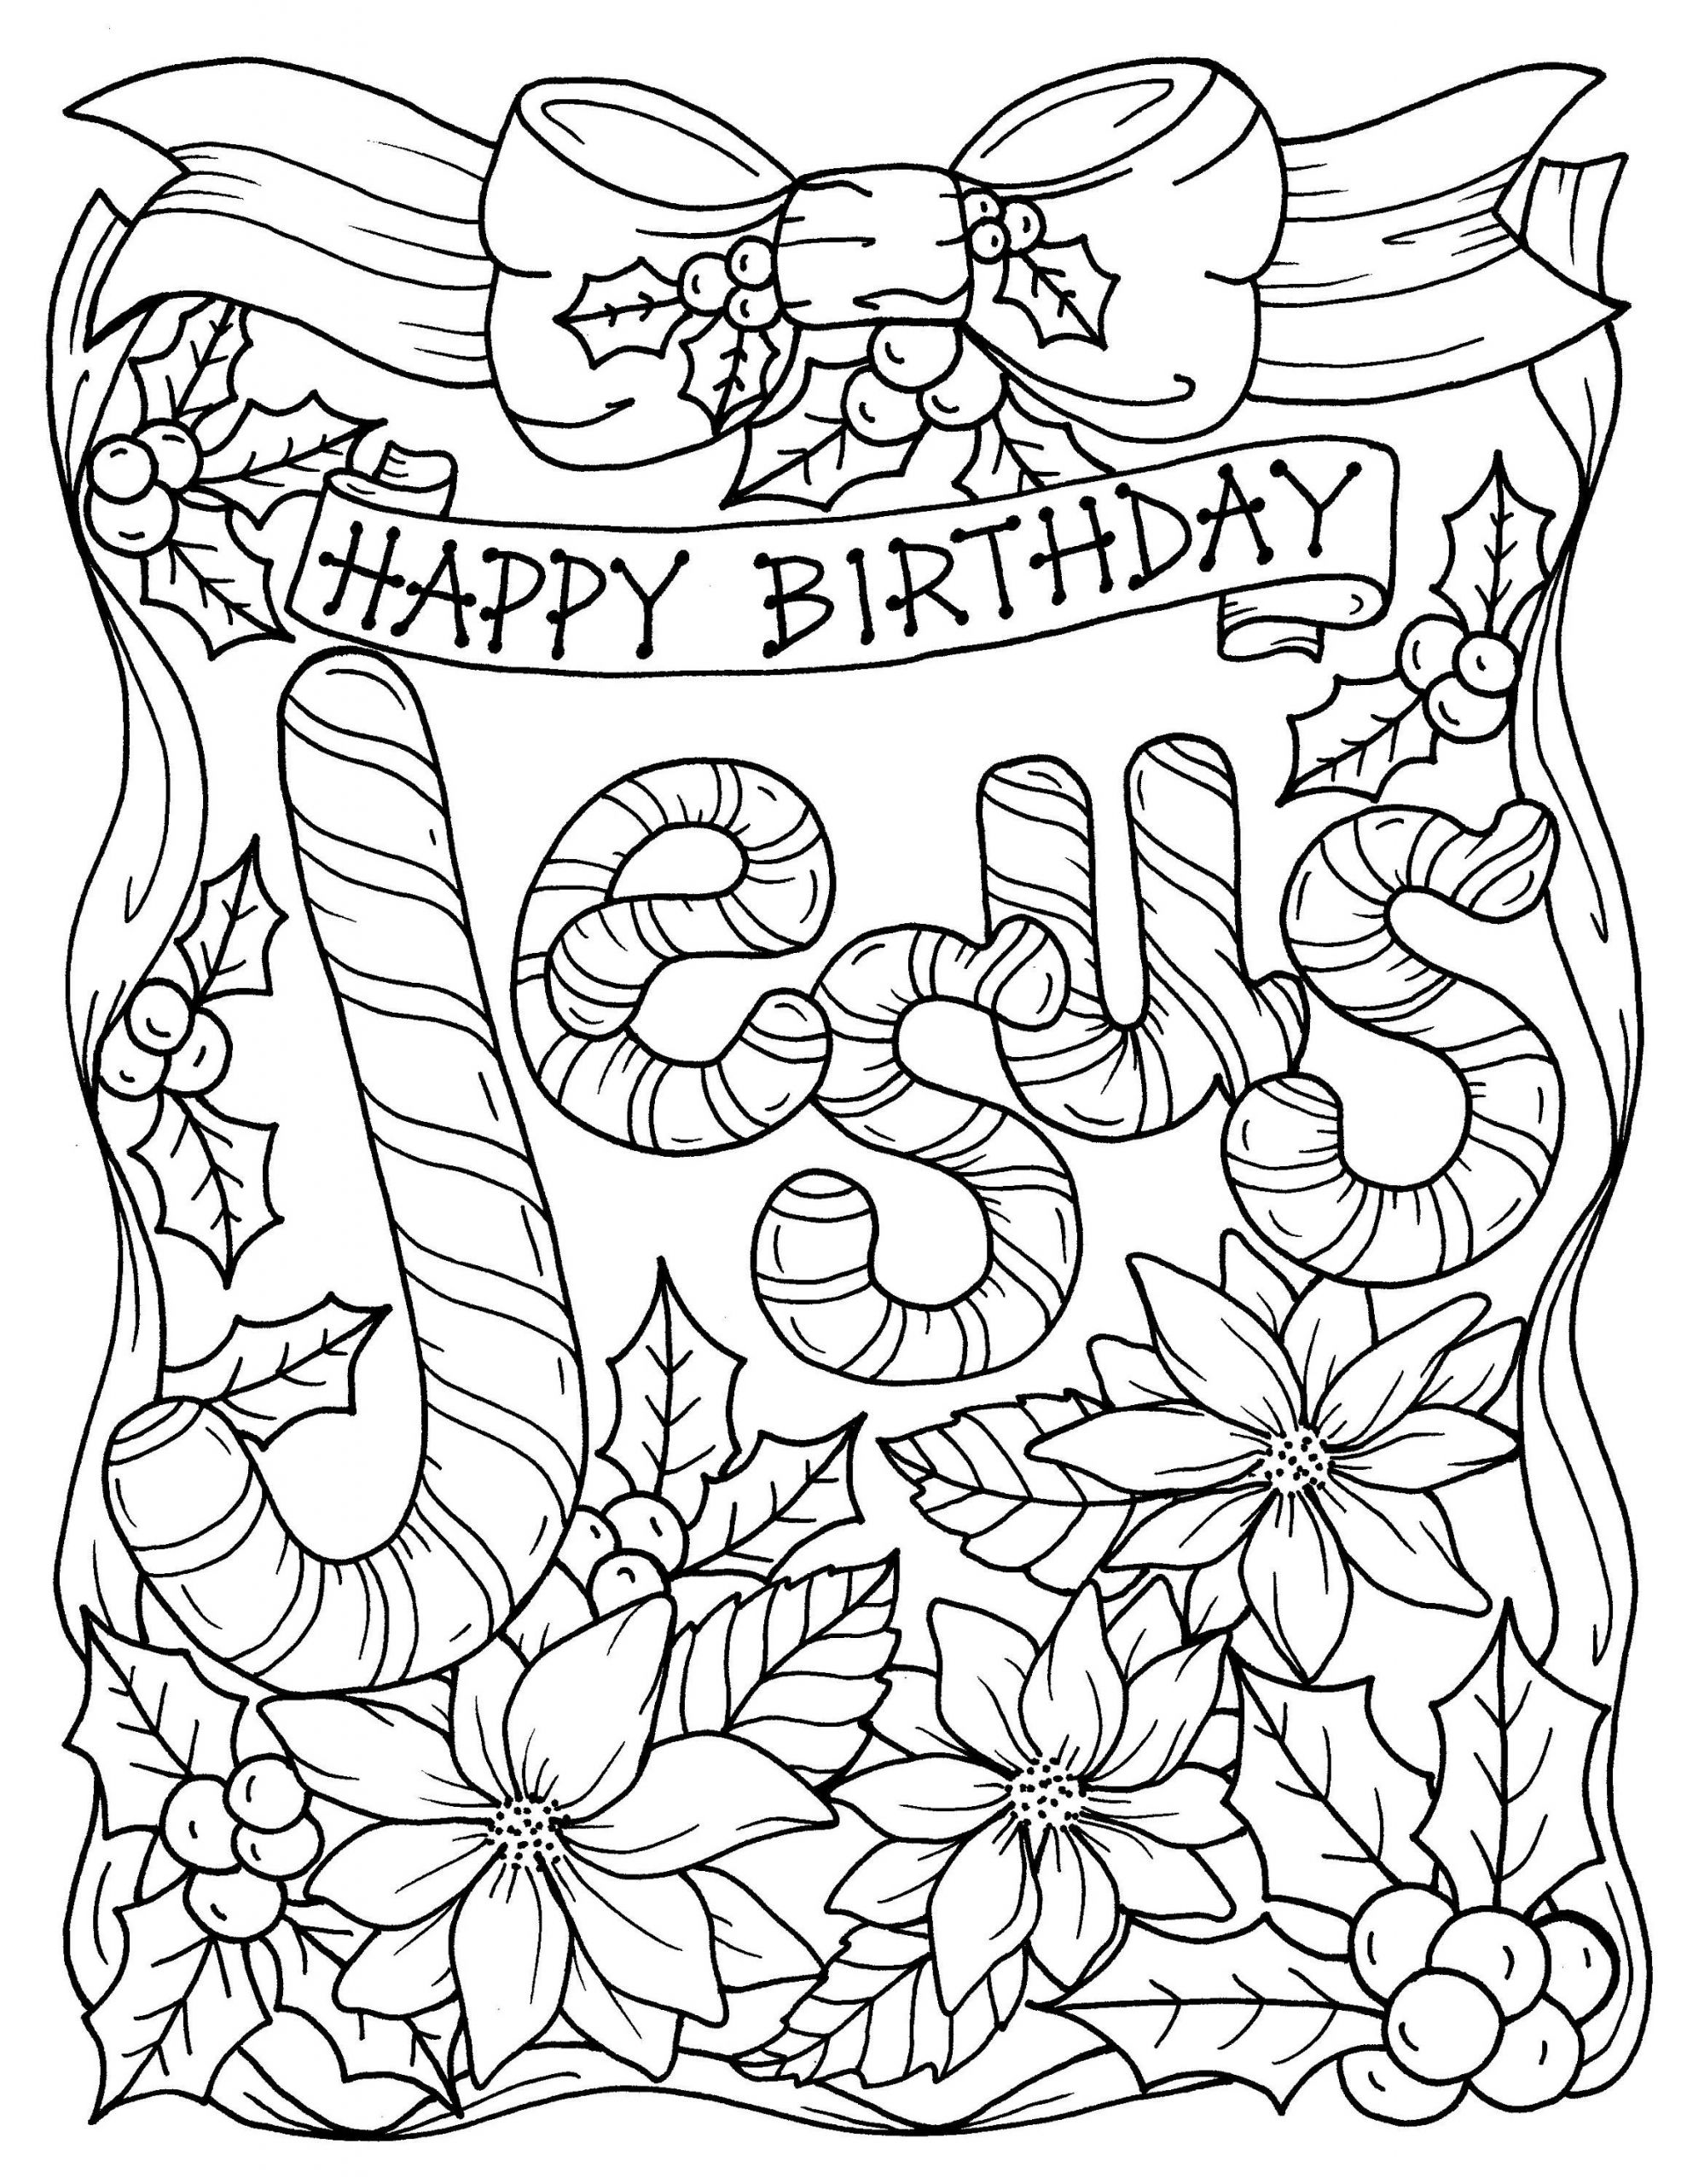 Christmas Adult Coloring Pages
 5 Pages Christmas Coloring Christian Religious scripture